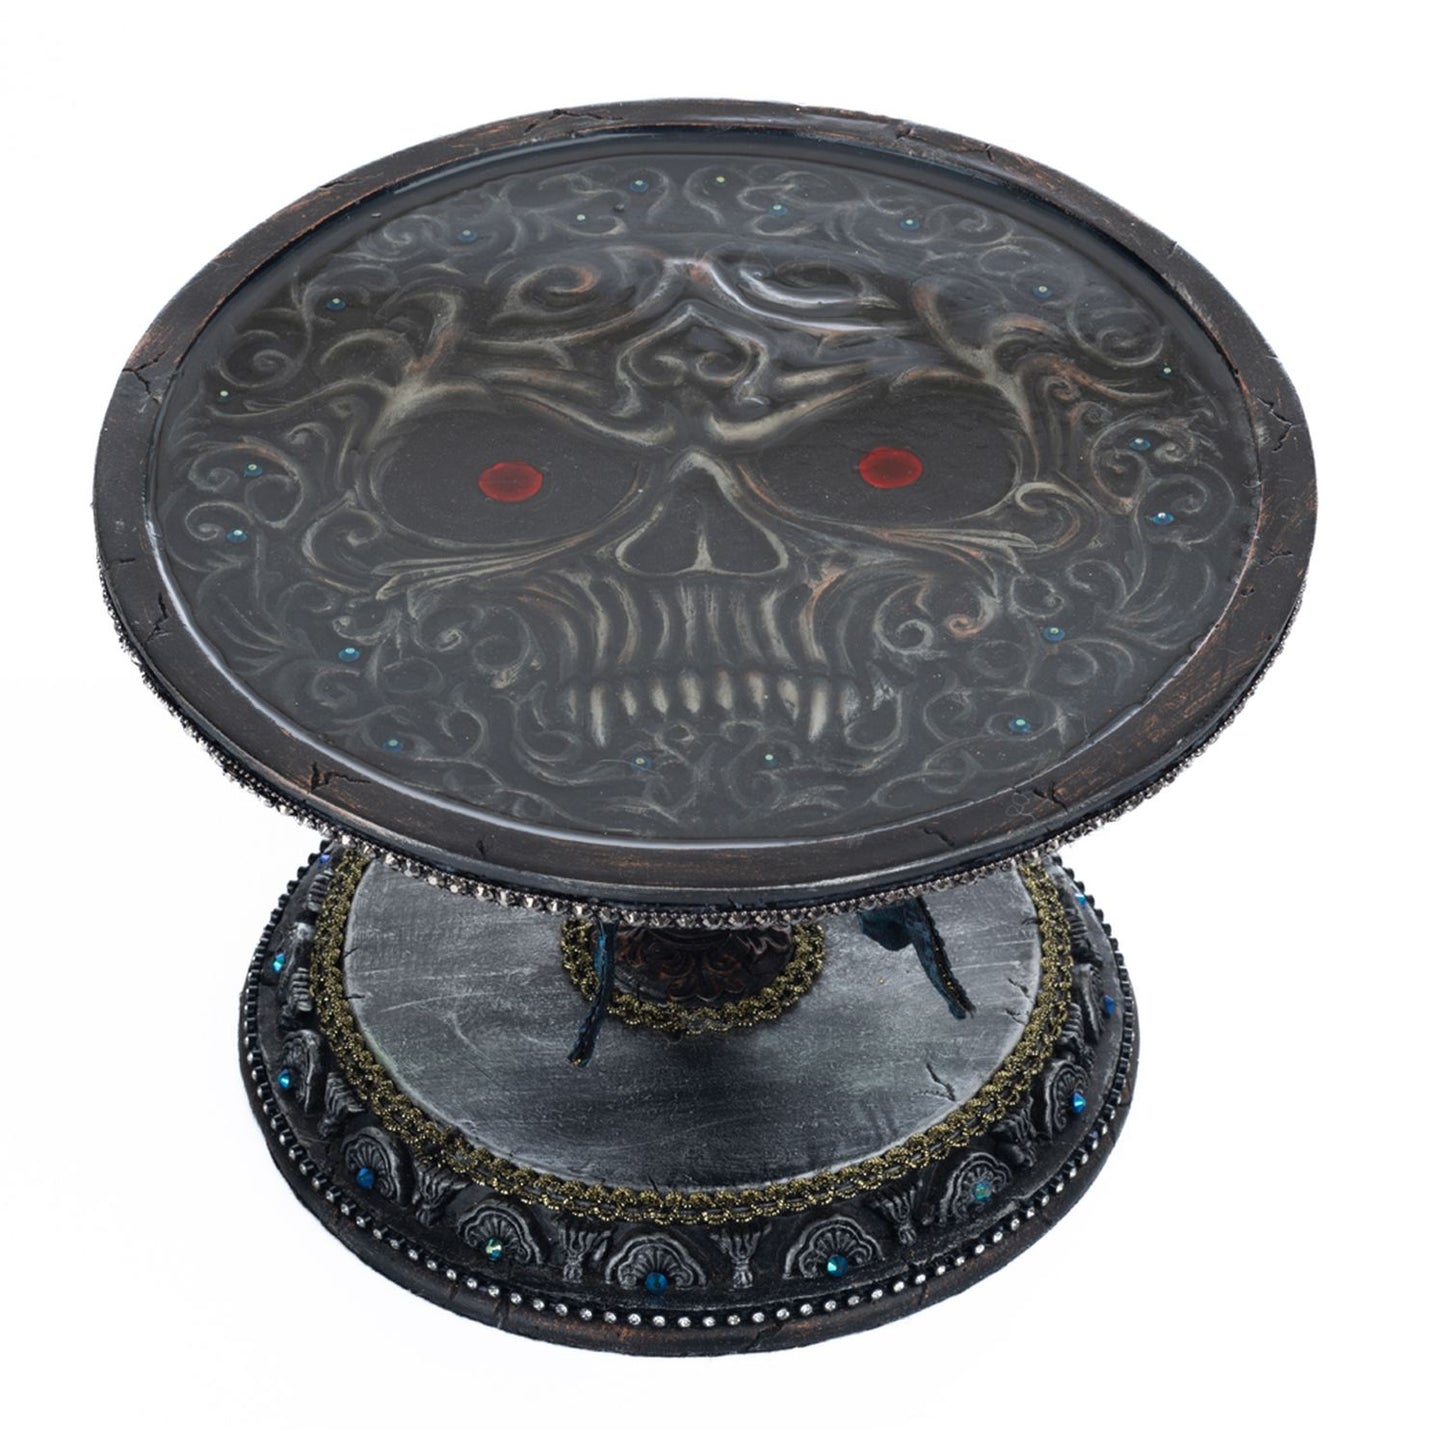 Katherine's Collection 2023 Seers and Takers  11"x7" Skull Cake Plate, Black Resin